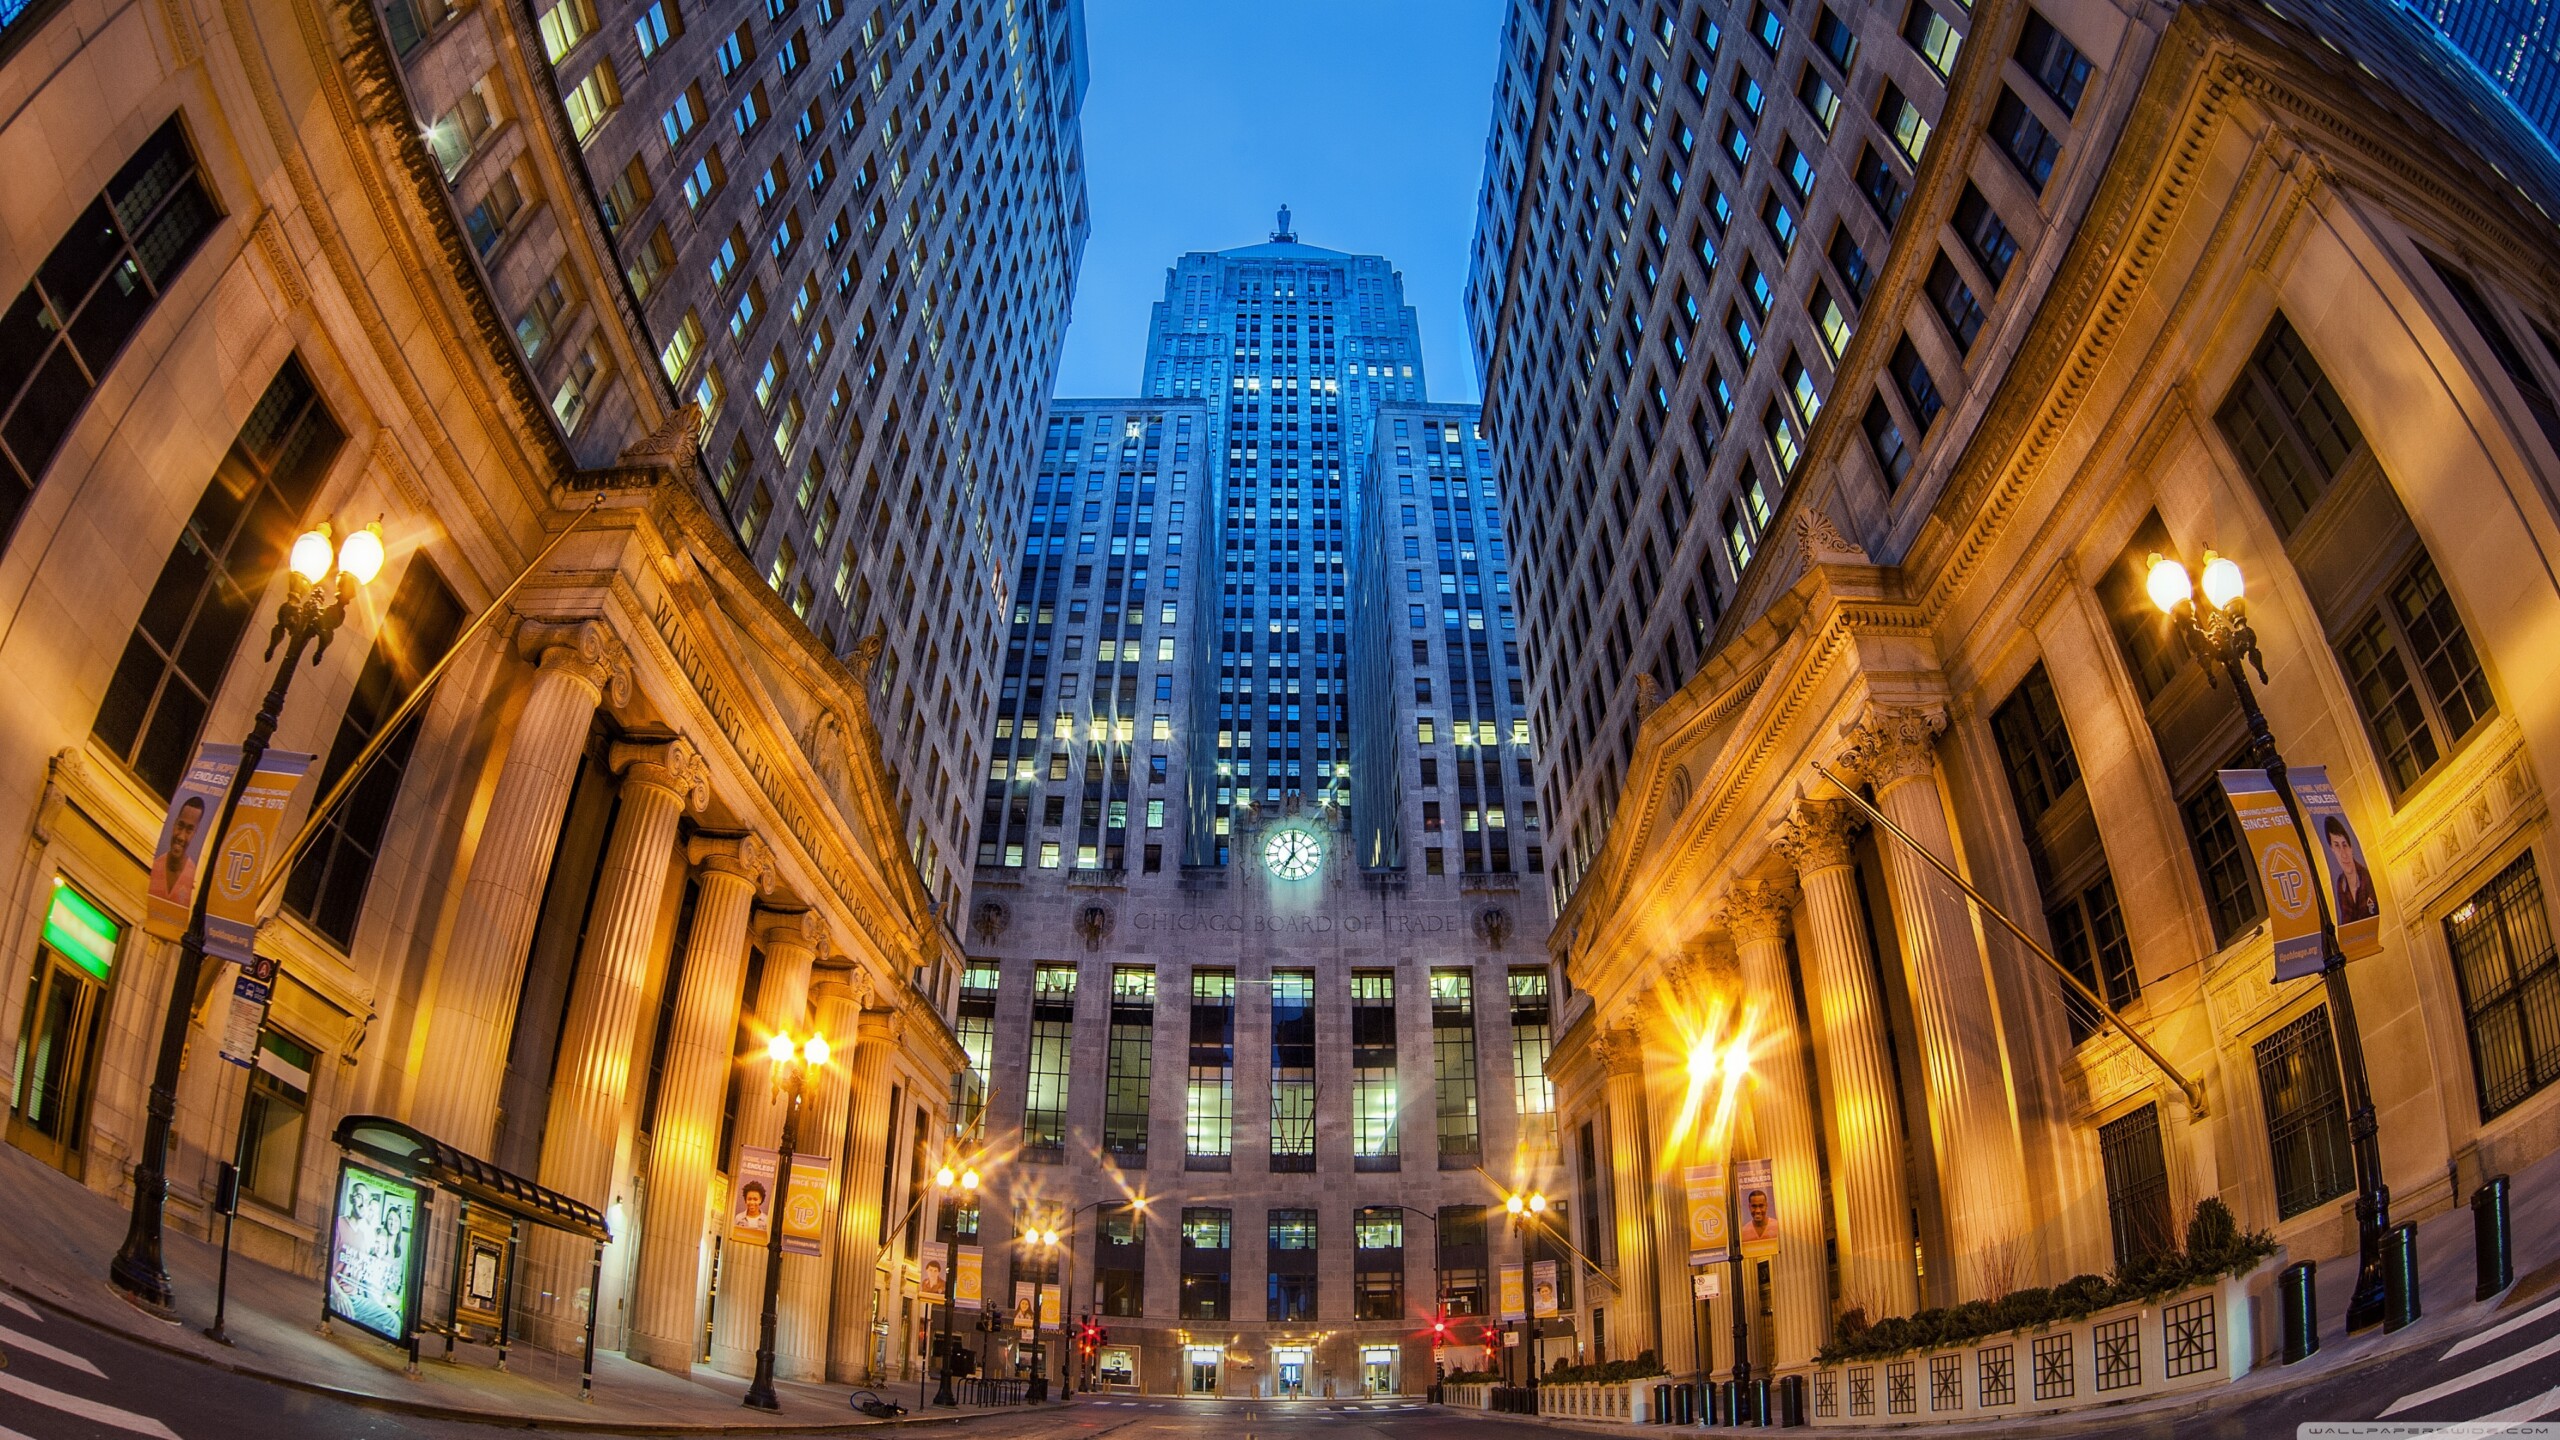 Alphacution Publishes “The Chicago Trading Company” Case Study